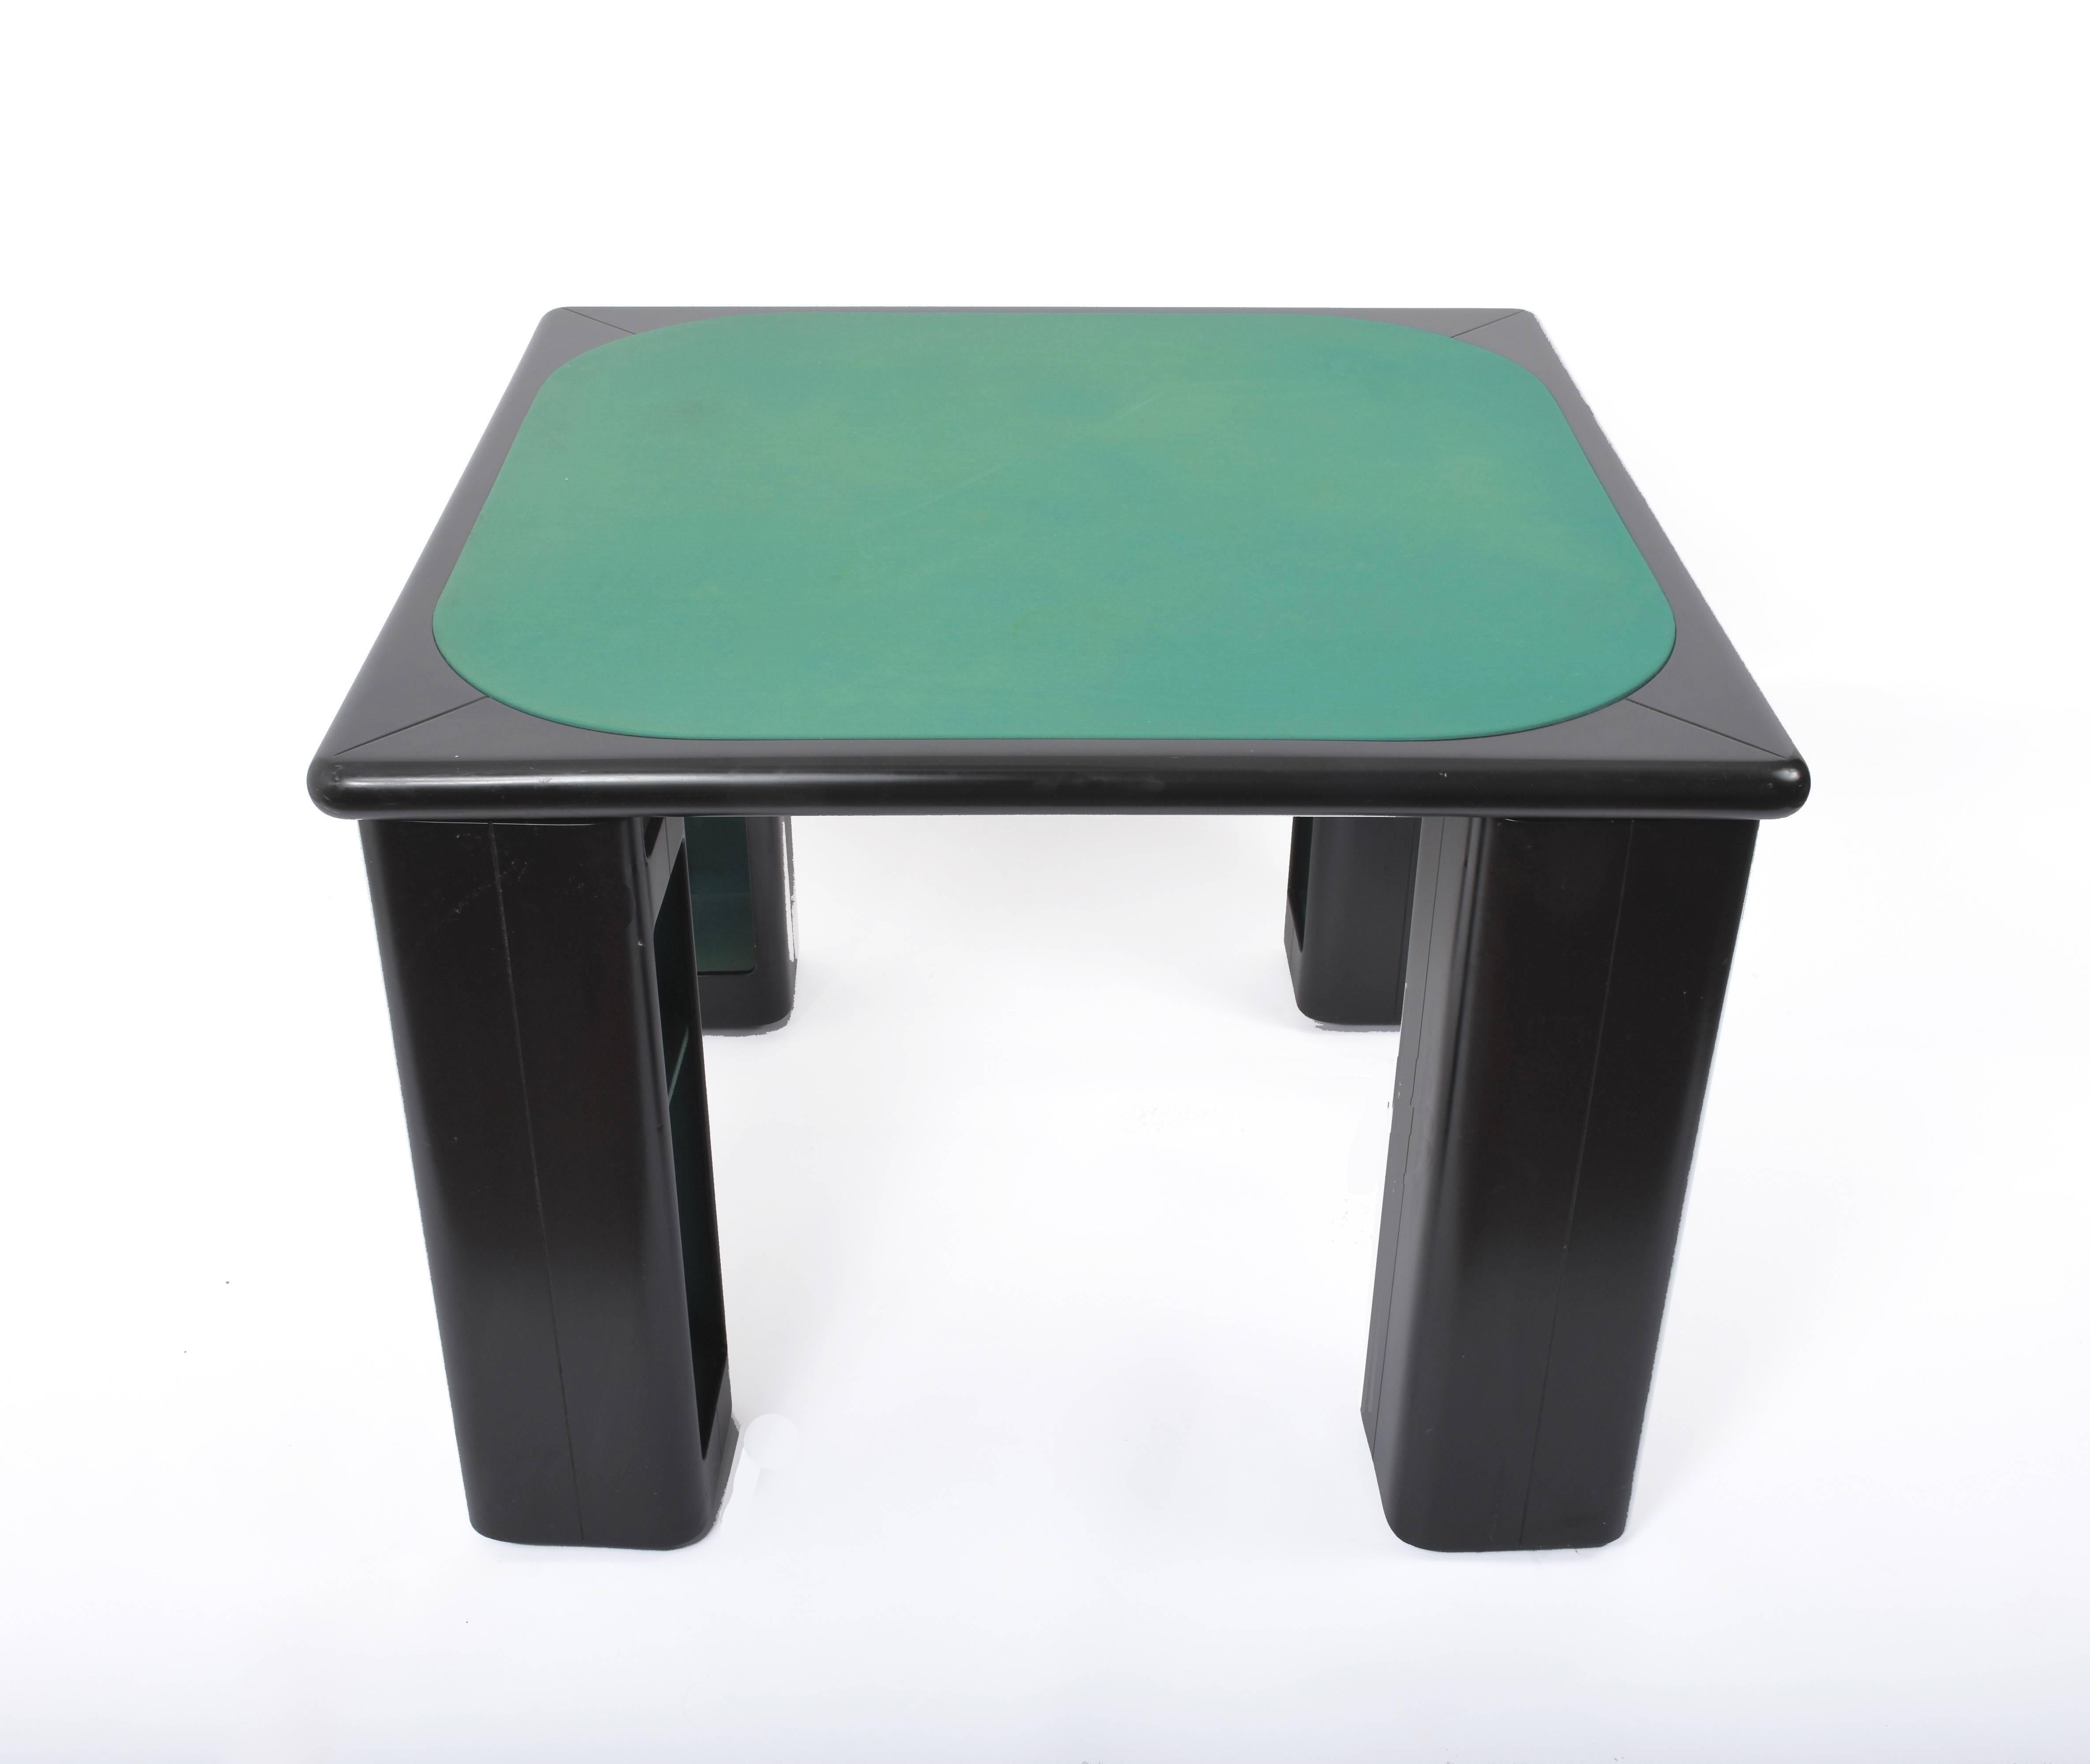 Card game or poker table by Pierluigi Molinari for Pozzi Milano signed - Structure in black lacquered glossy wood
All four legs can rotate around a chrome tube to reveal a deposit for cards / games or glasses
The laminated top shelf can be used to